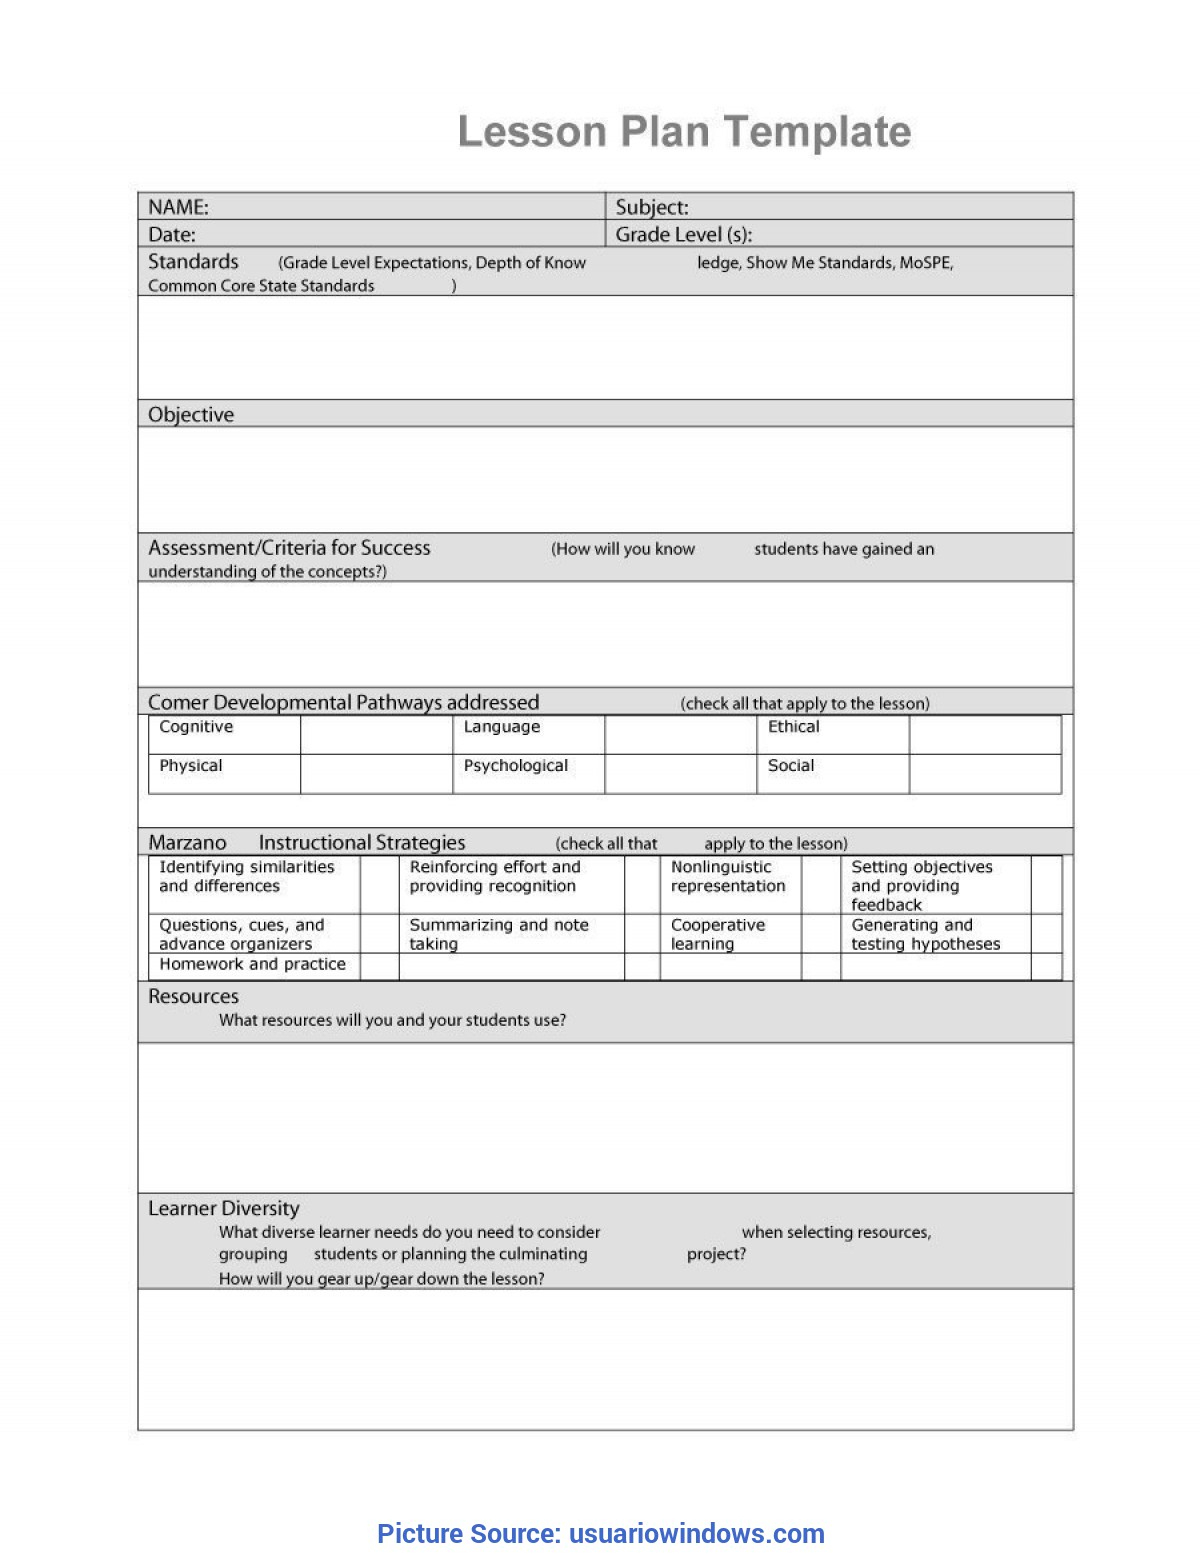 Marzano Lesson Plan Template Free - Lesson Plans Learning